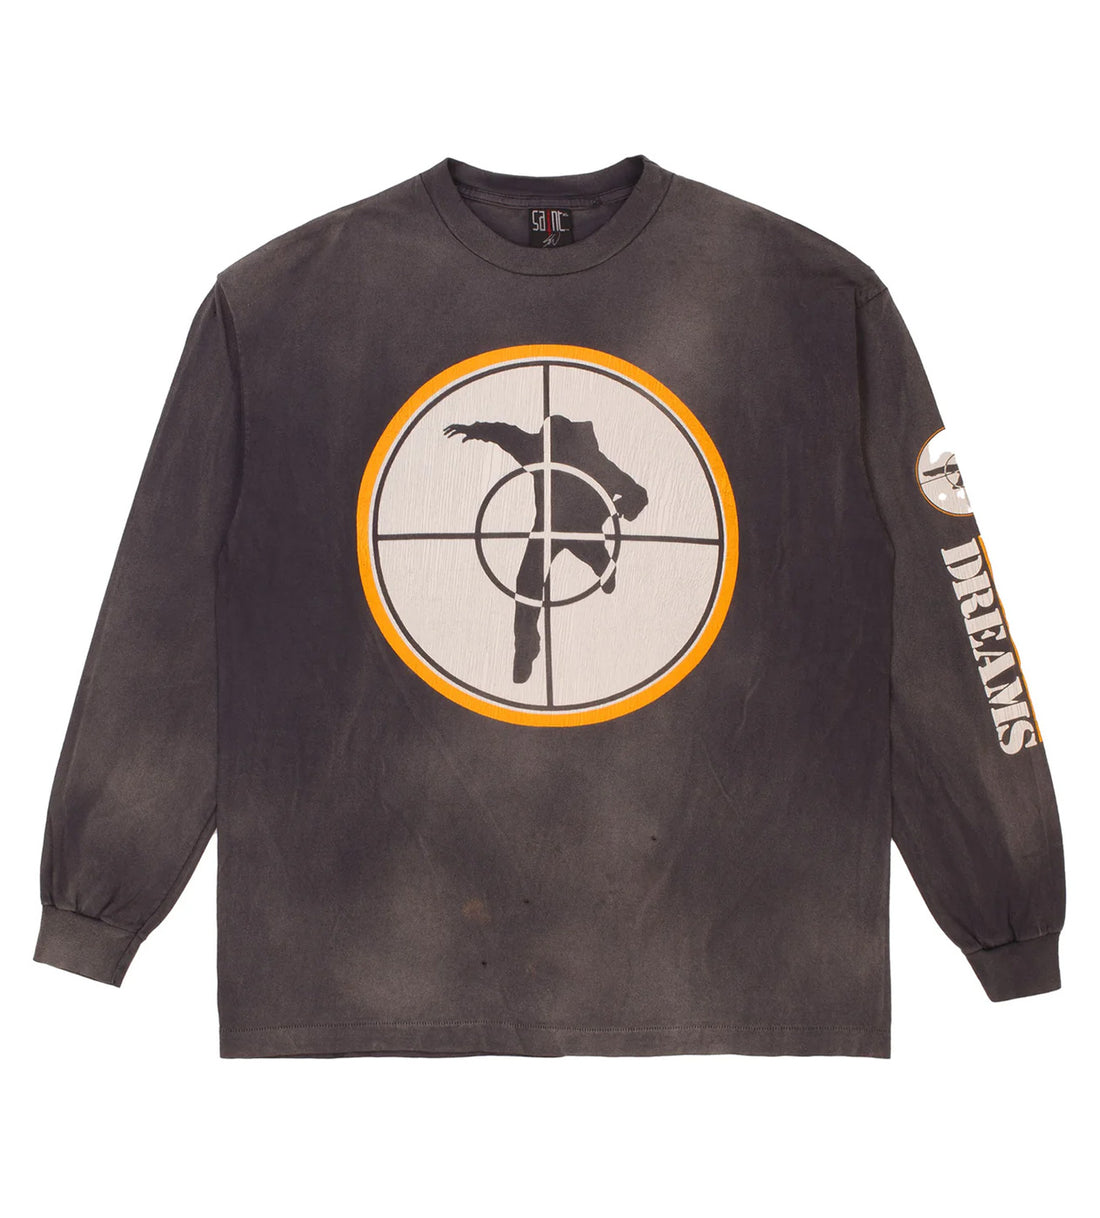 Saint Michael x Sean Wotherspoon Target L/S front view